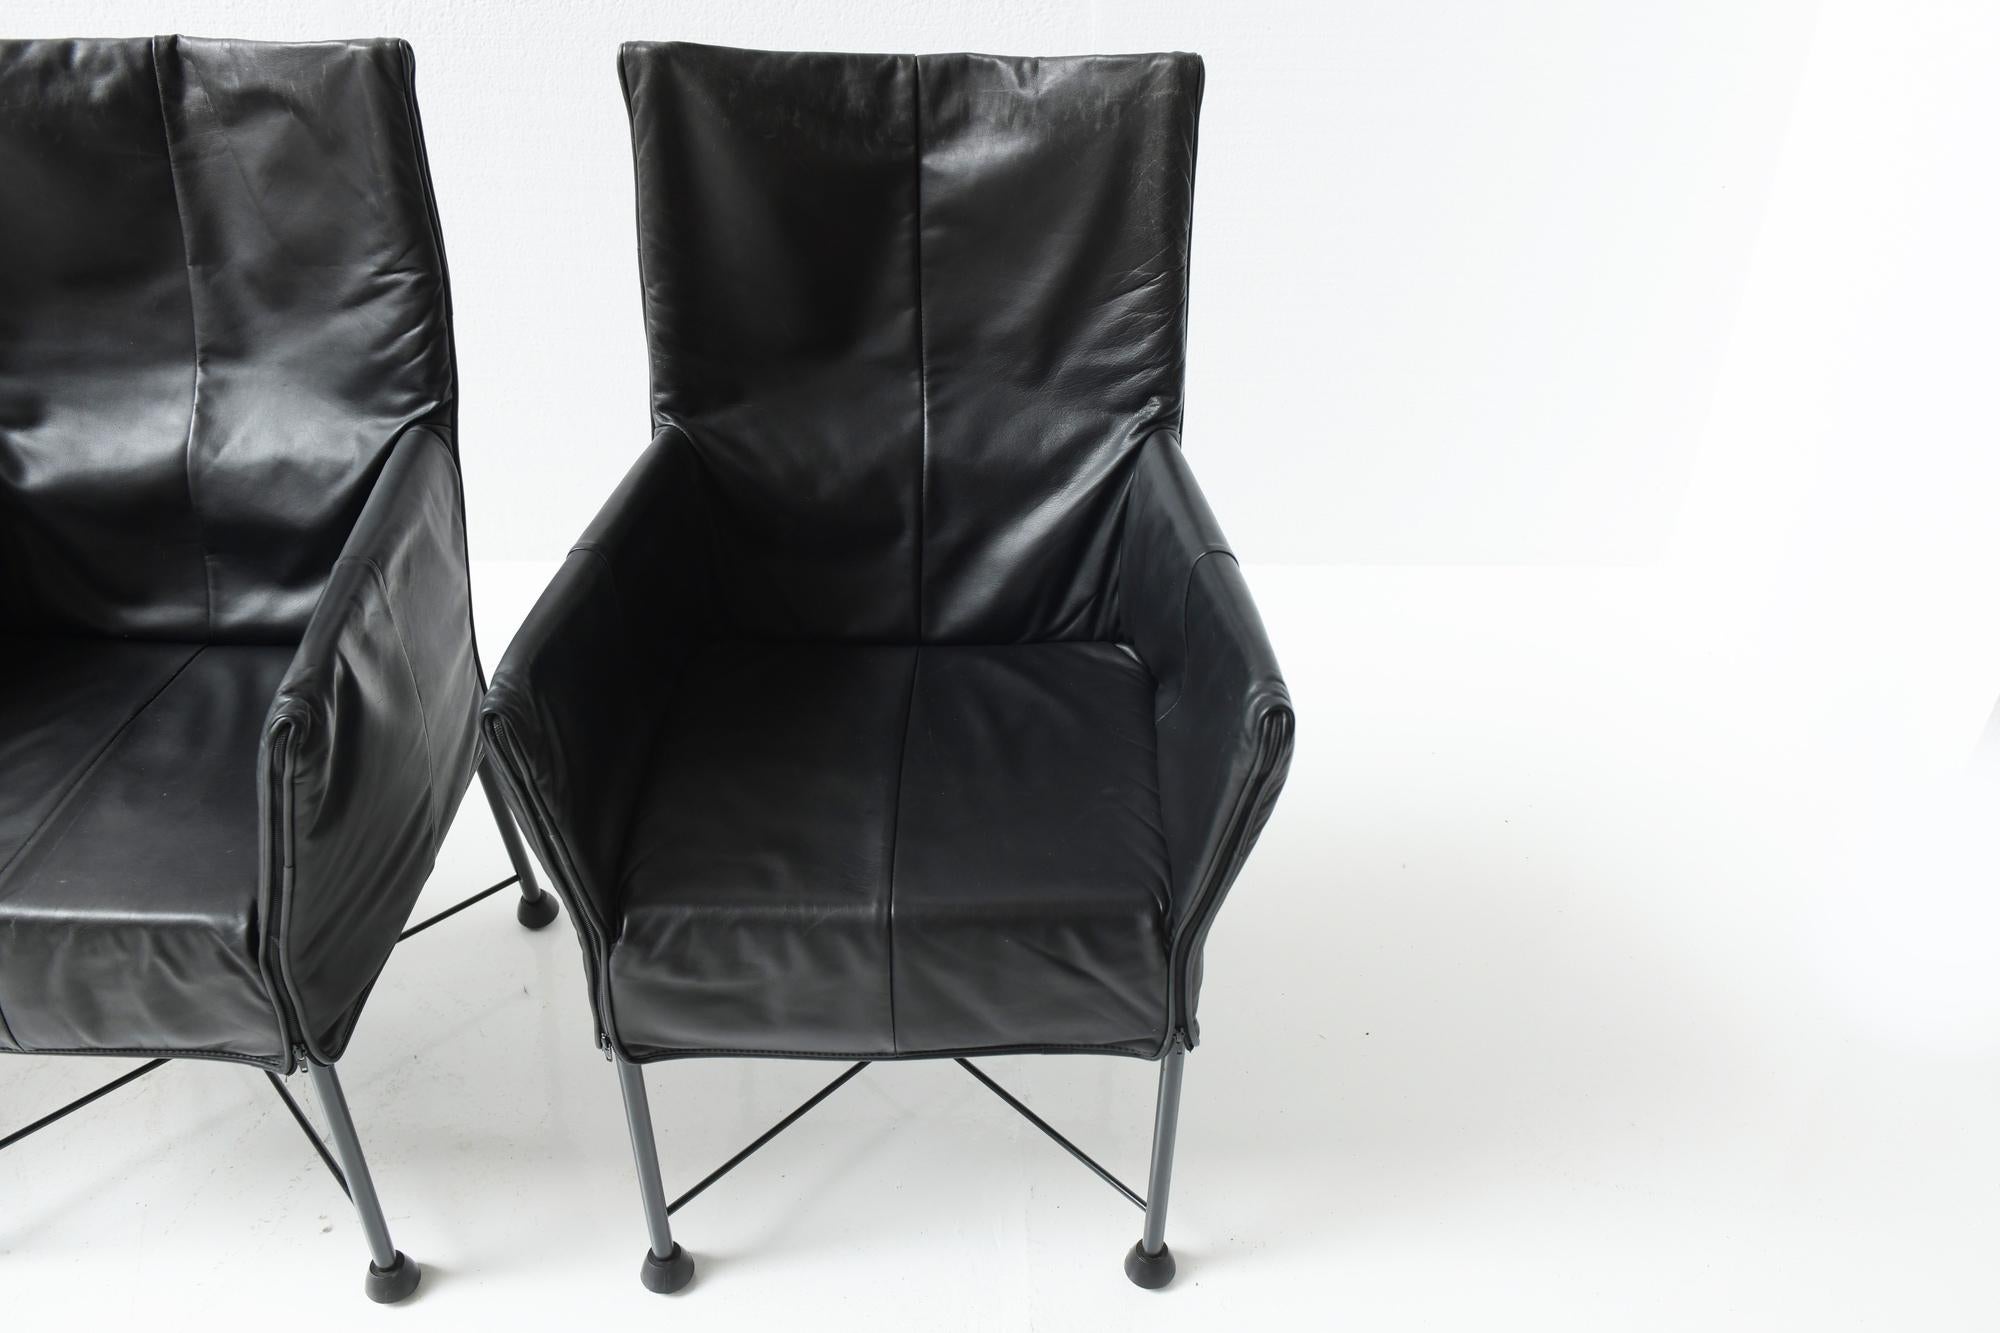 6 x Chaplin Vintage Leather Dining Chairs by Gerard van den Berg for Montis For Sale 9